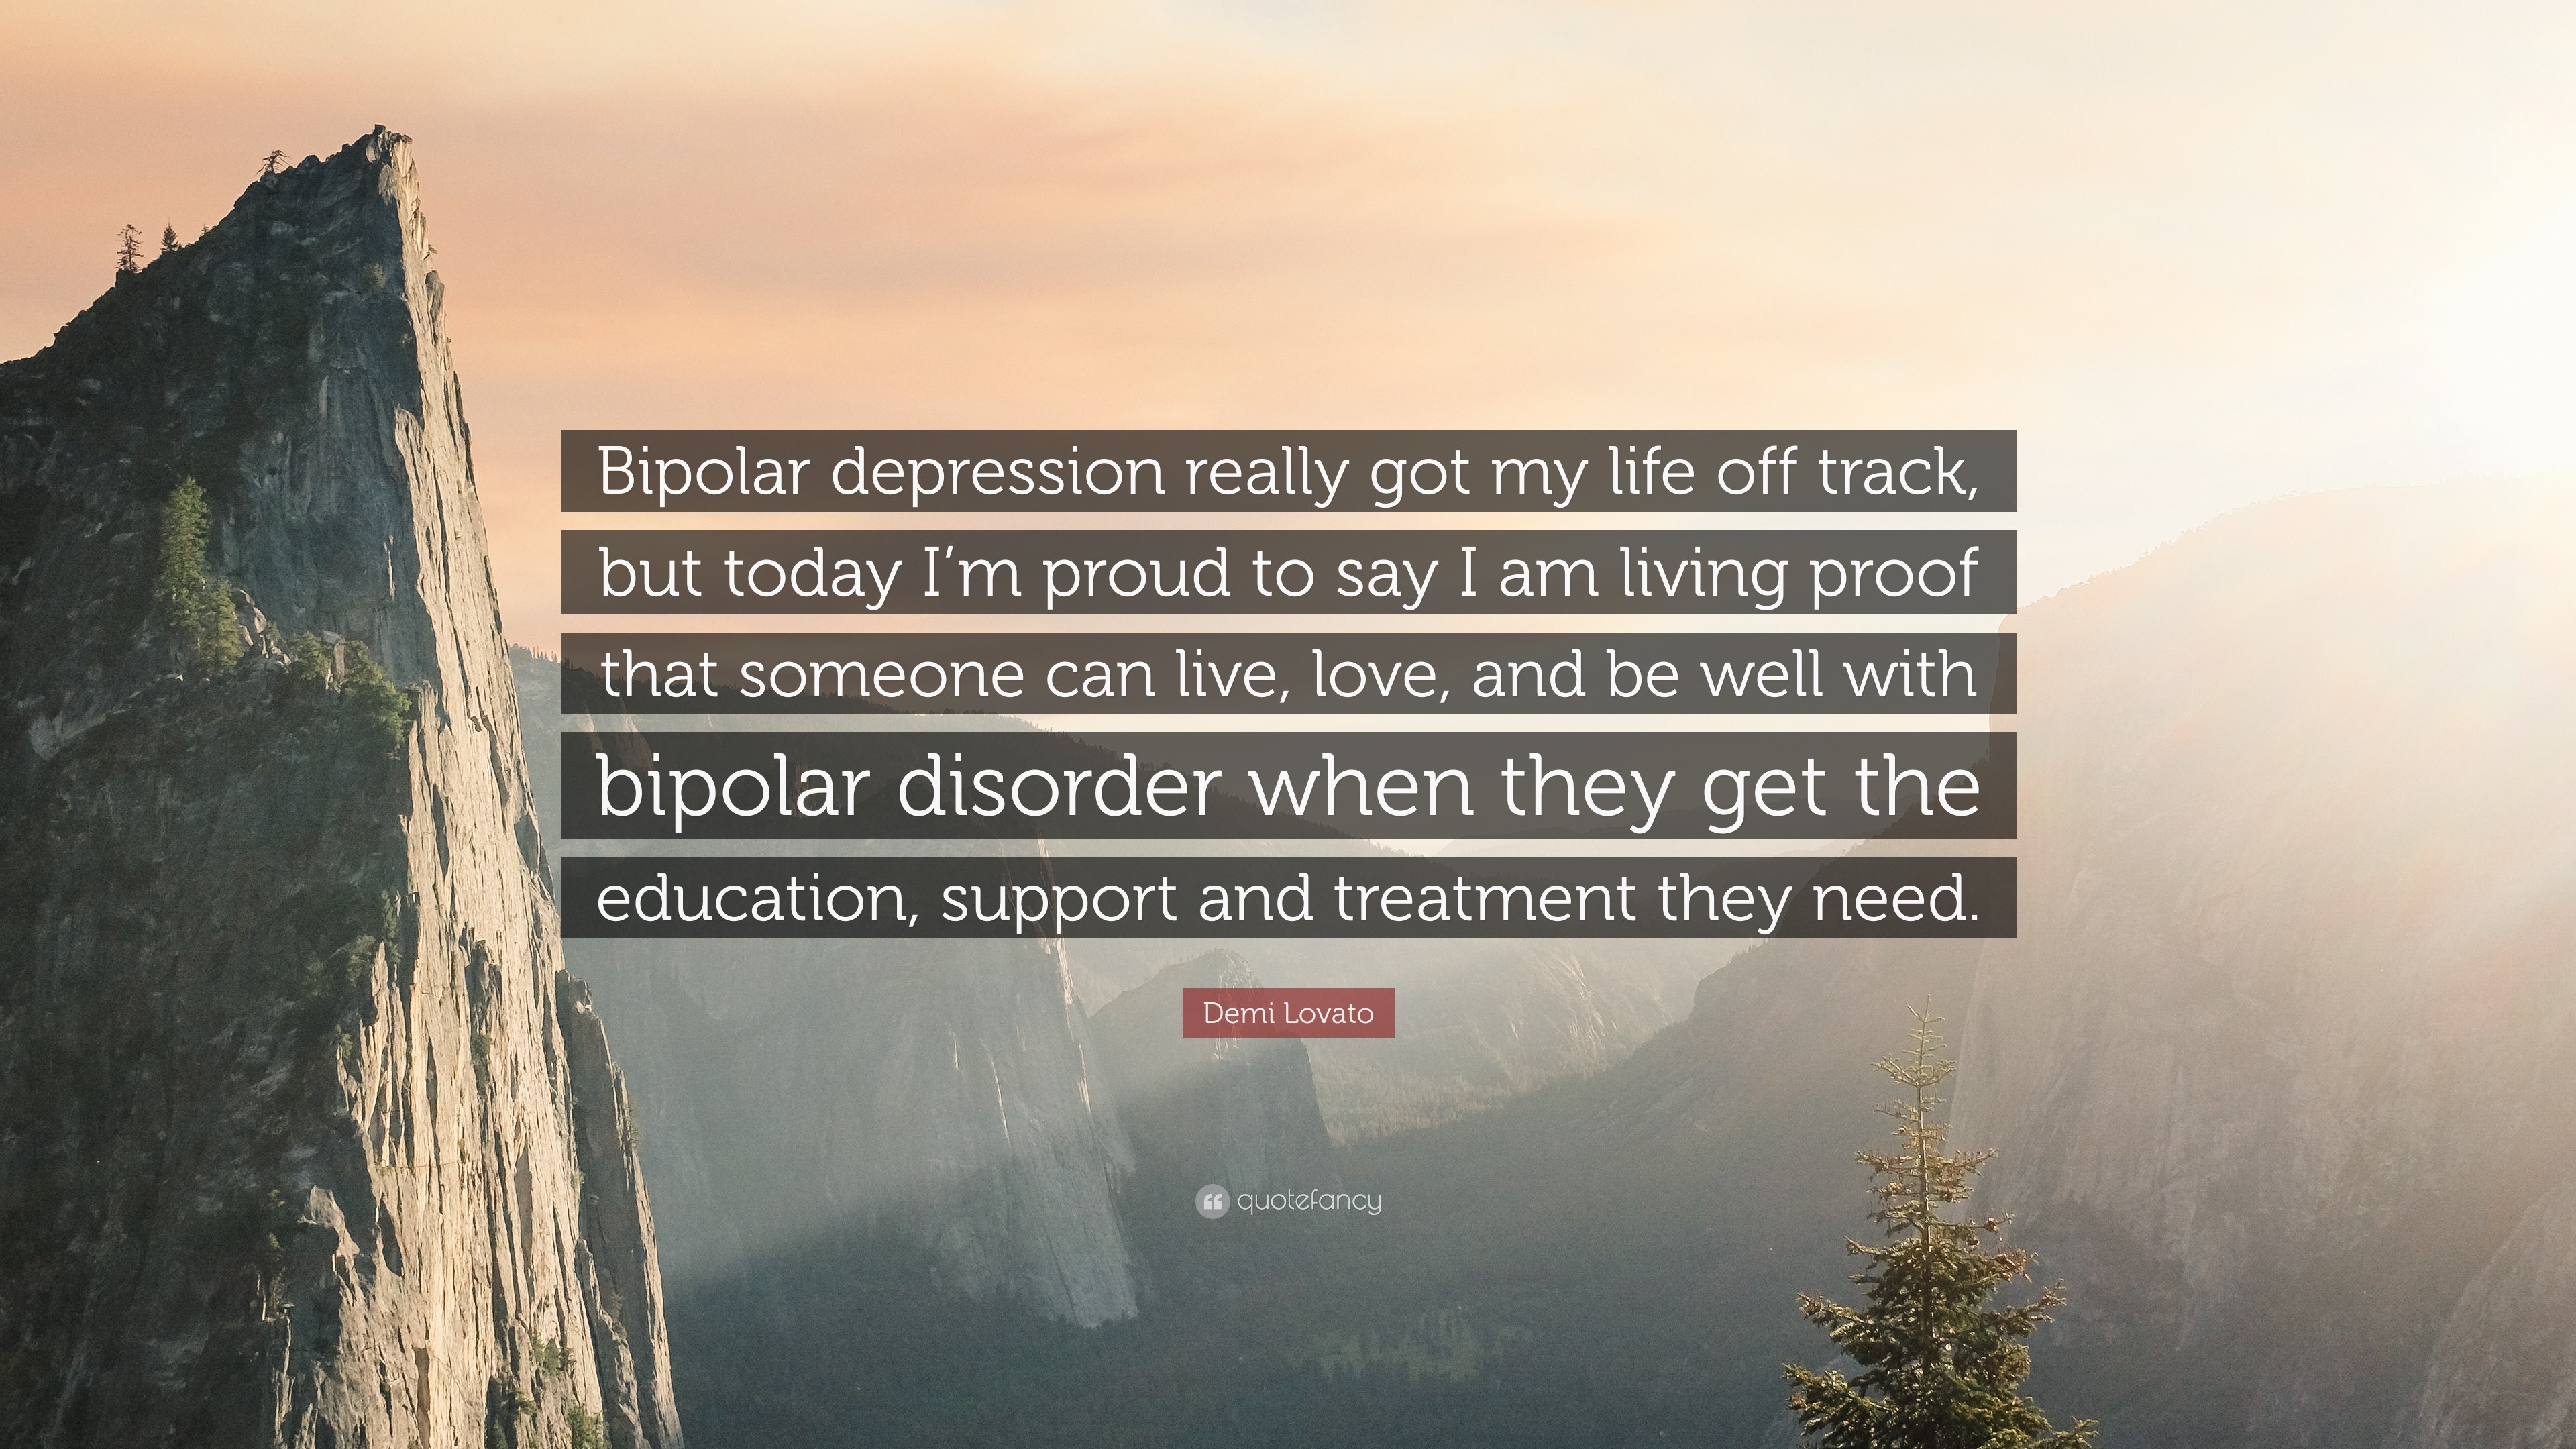 Demi Lovato Quote “Bipolar depression really got my life off track but today